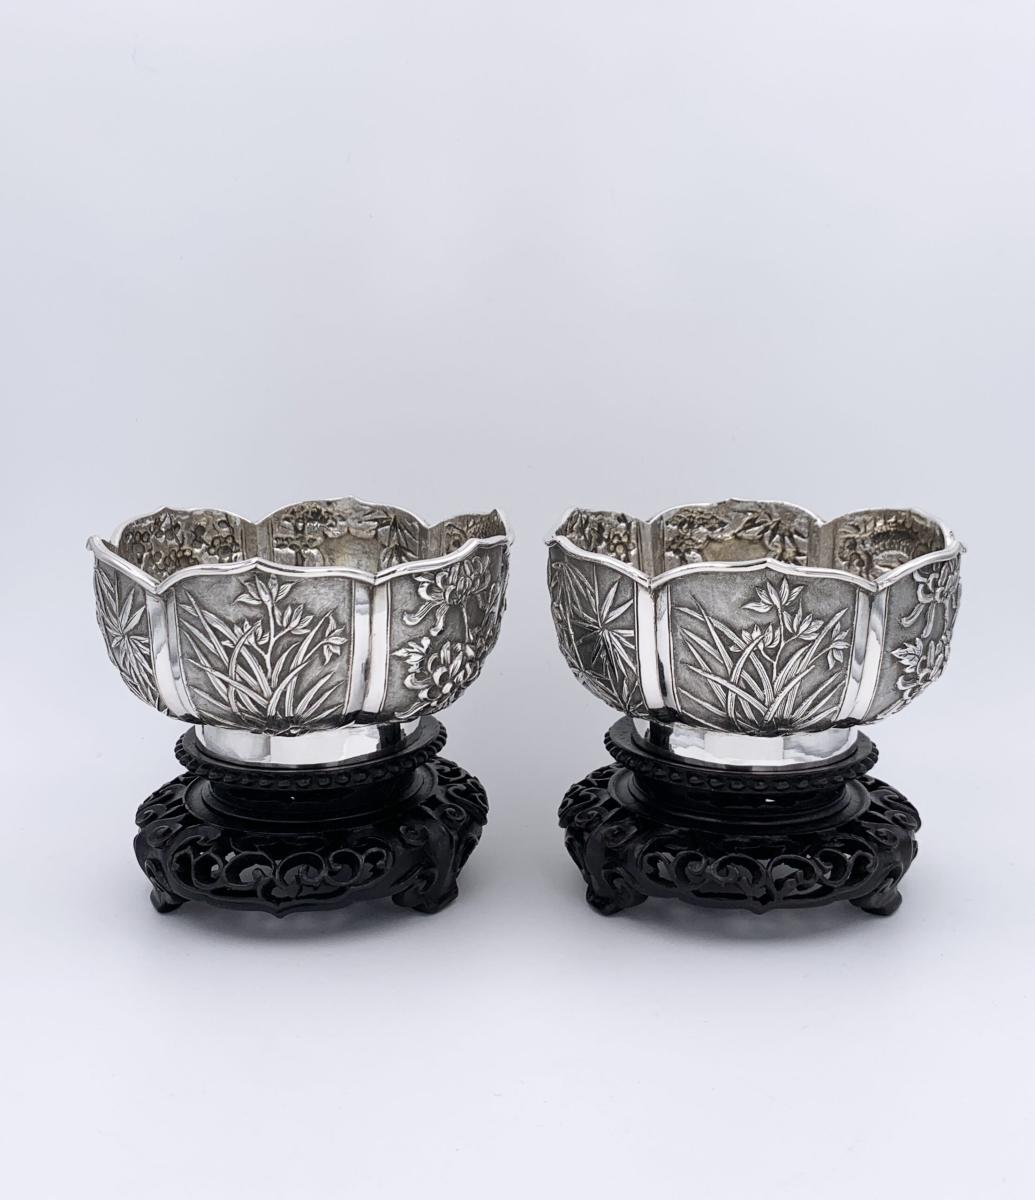 Pair of Chinese Export Silver Bowls